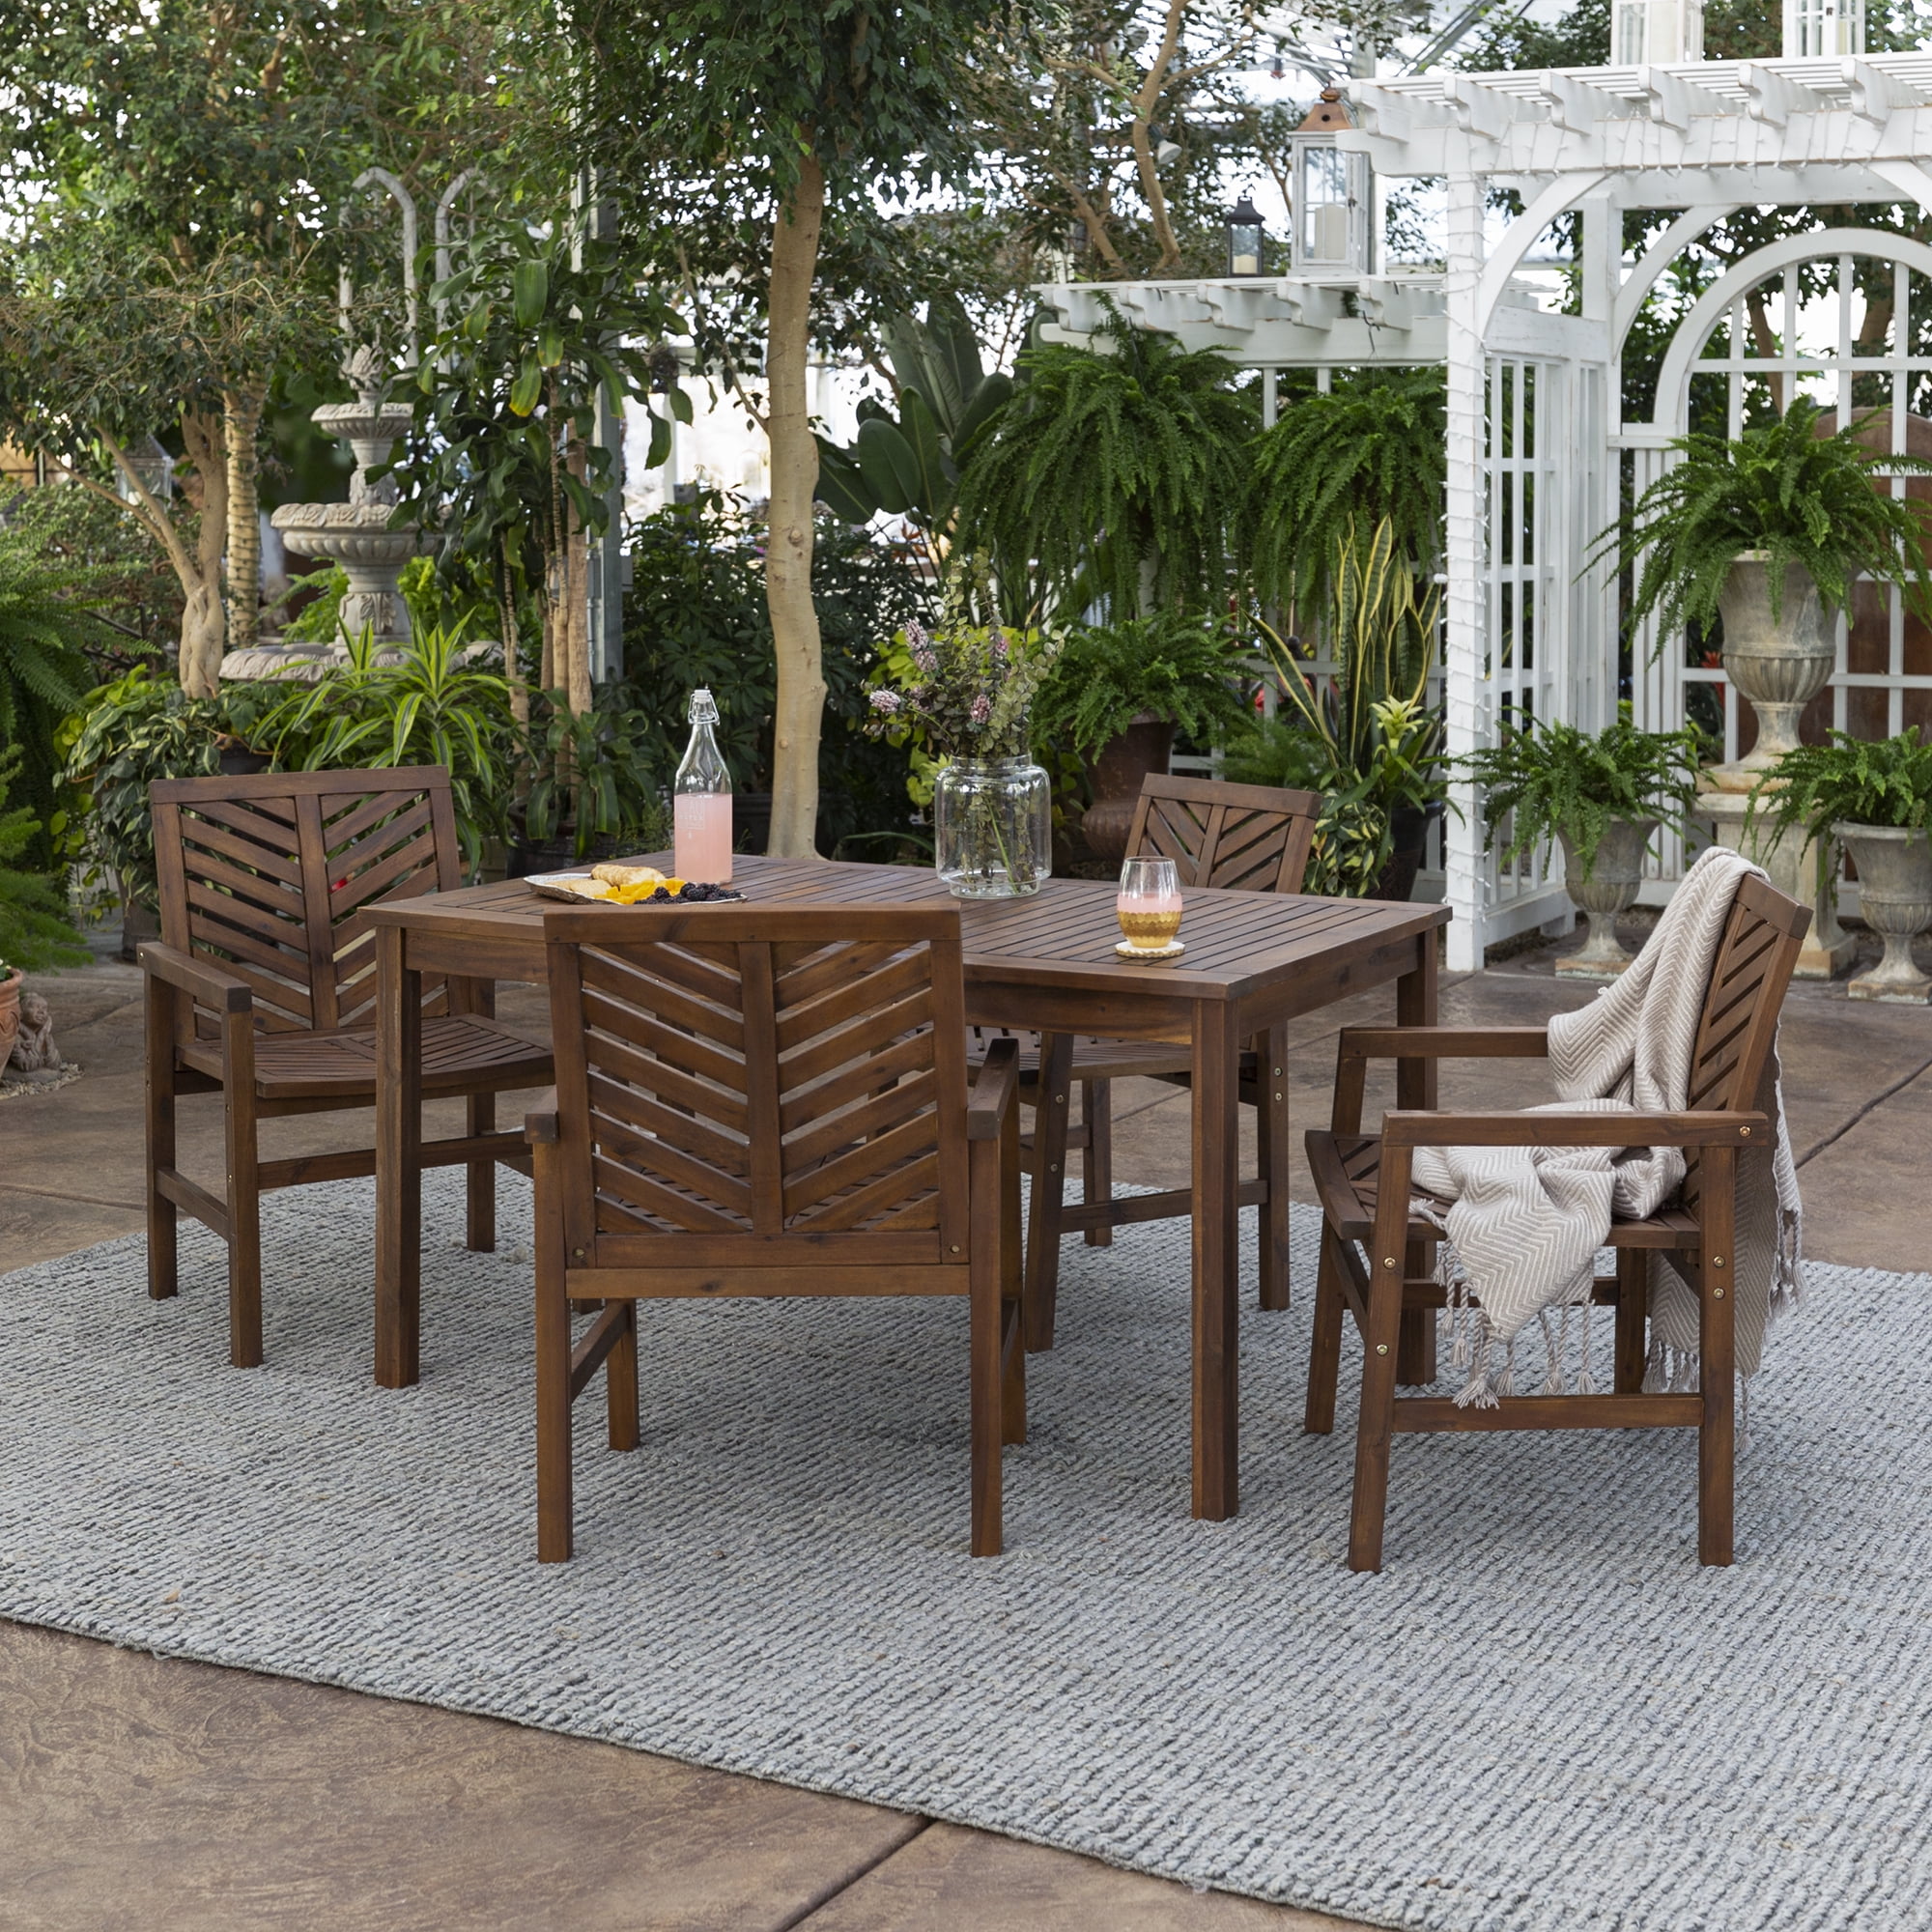 Manor Park Outdoor Patio Dining Set, 5 Piece, Multiple Colors and